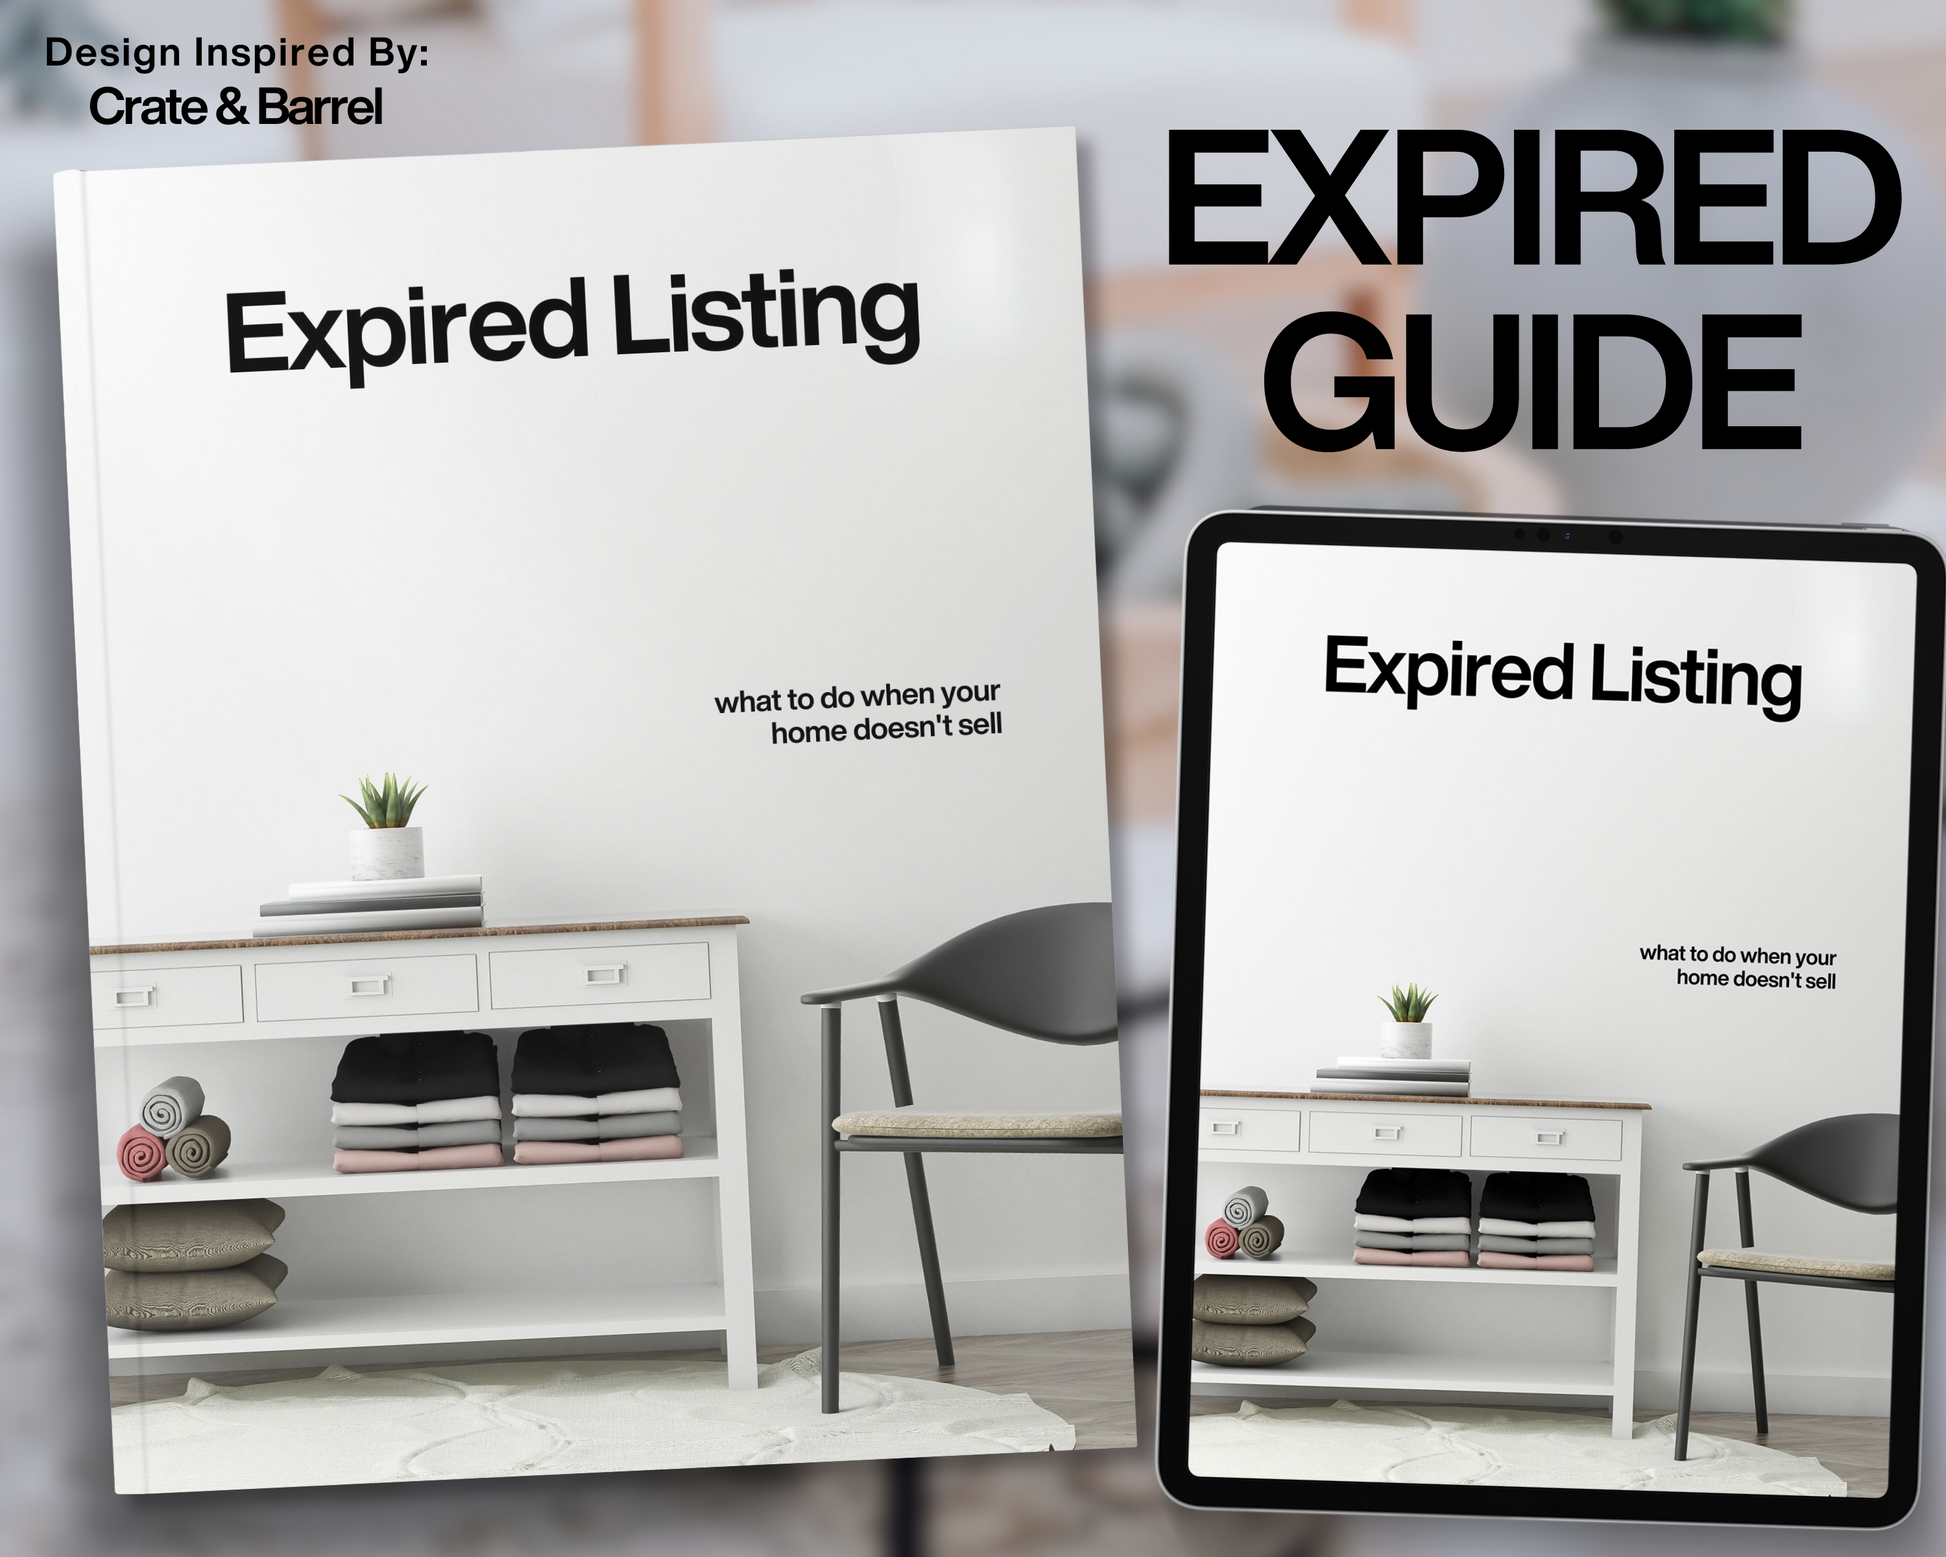 expired listing,editable canva,expired guide,farming postcard,hello neighbor flyer,home seller,listing packet,listing presentation,real estate farming,real estate letter,real estate mailer,real estate template,realtor introduction